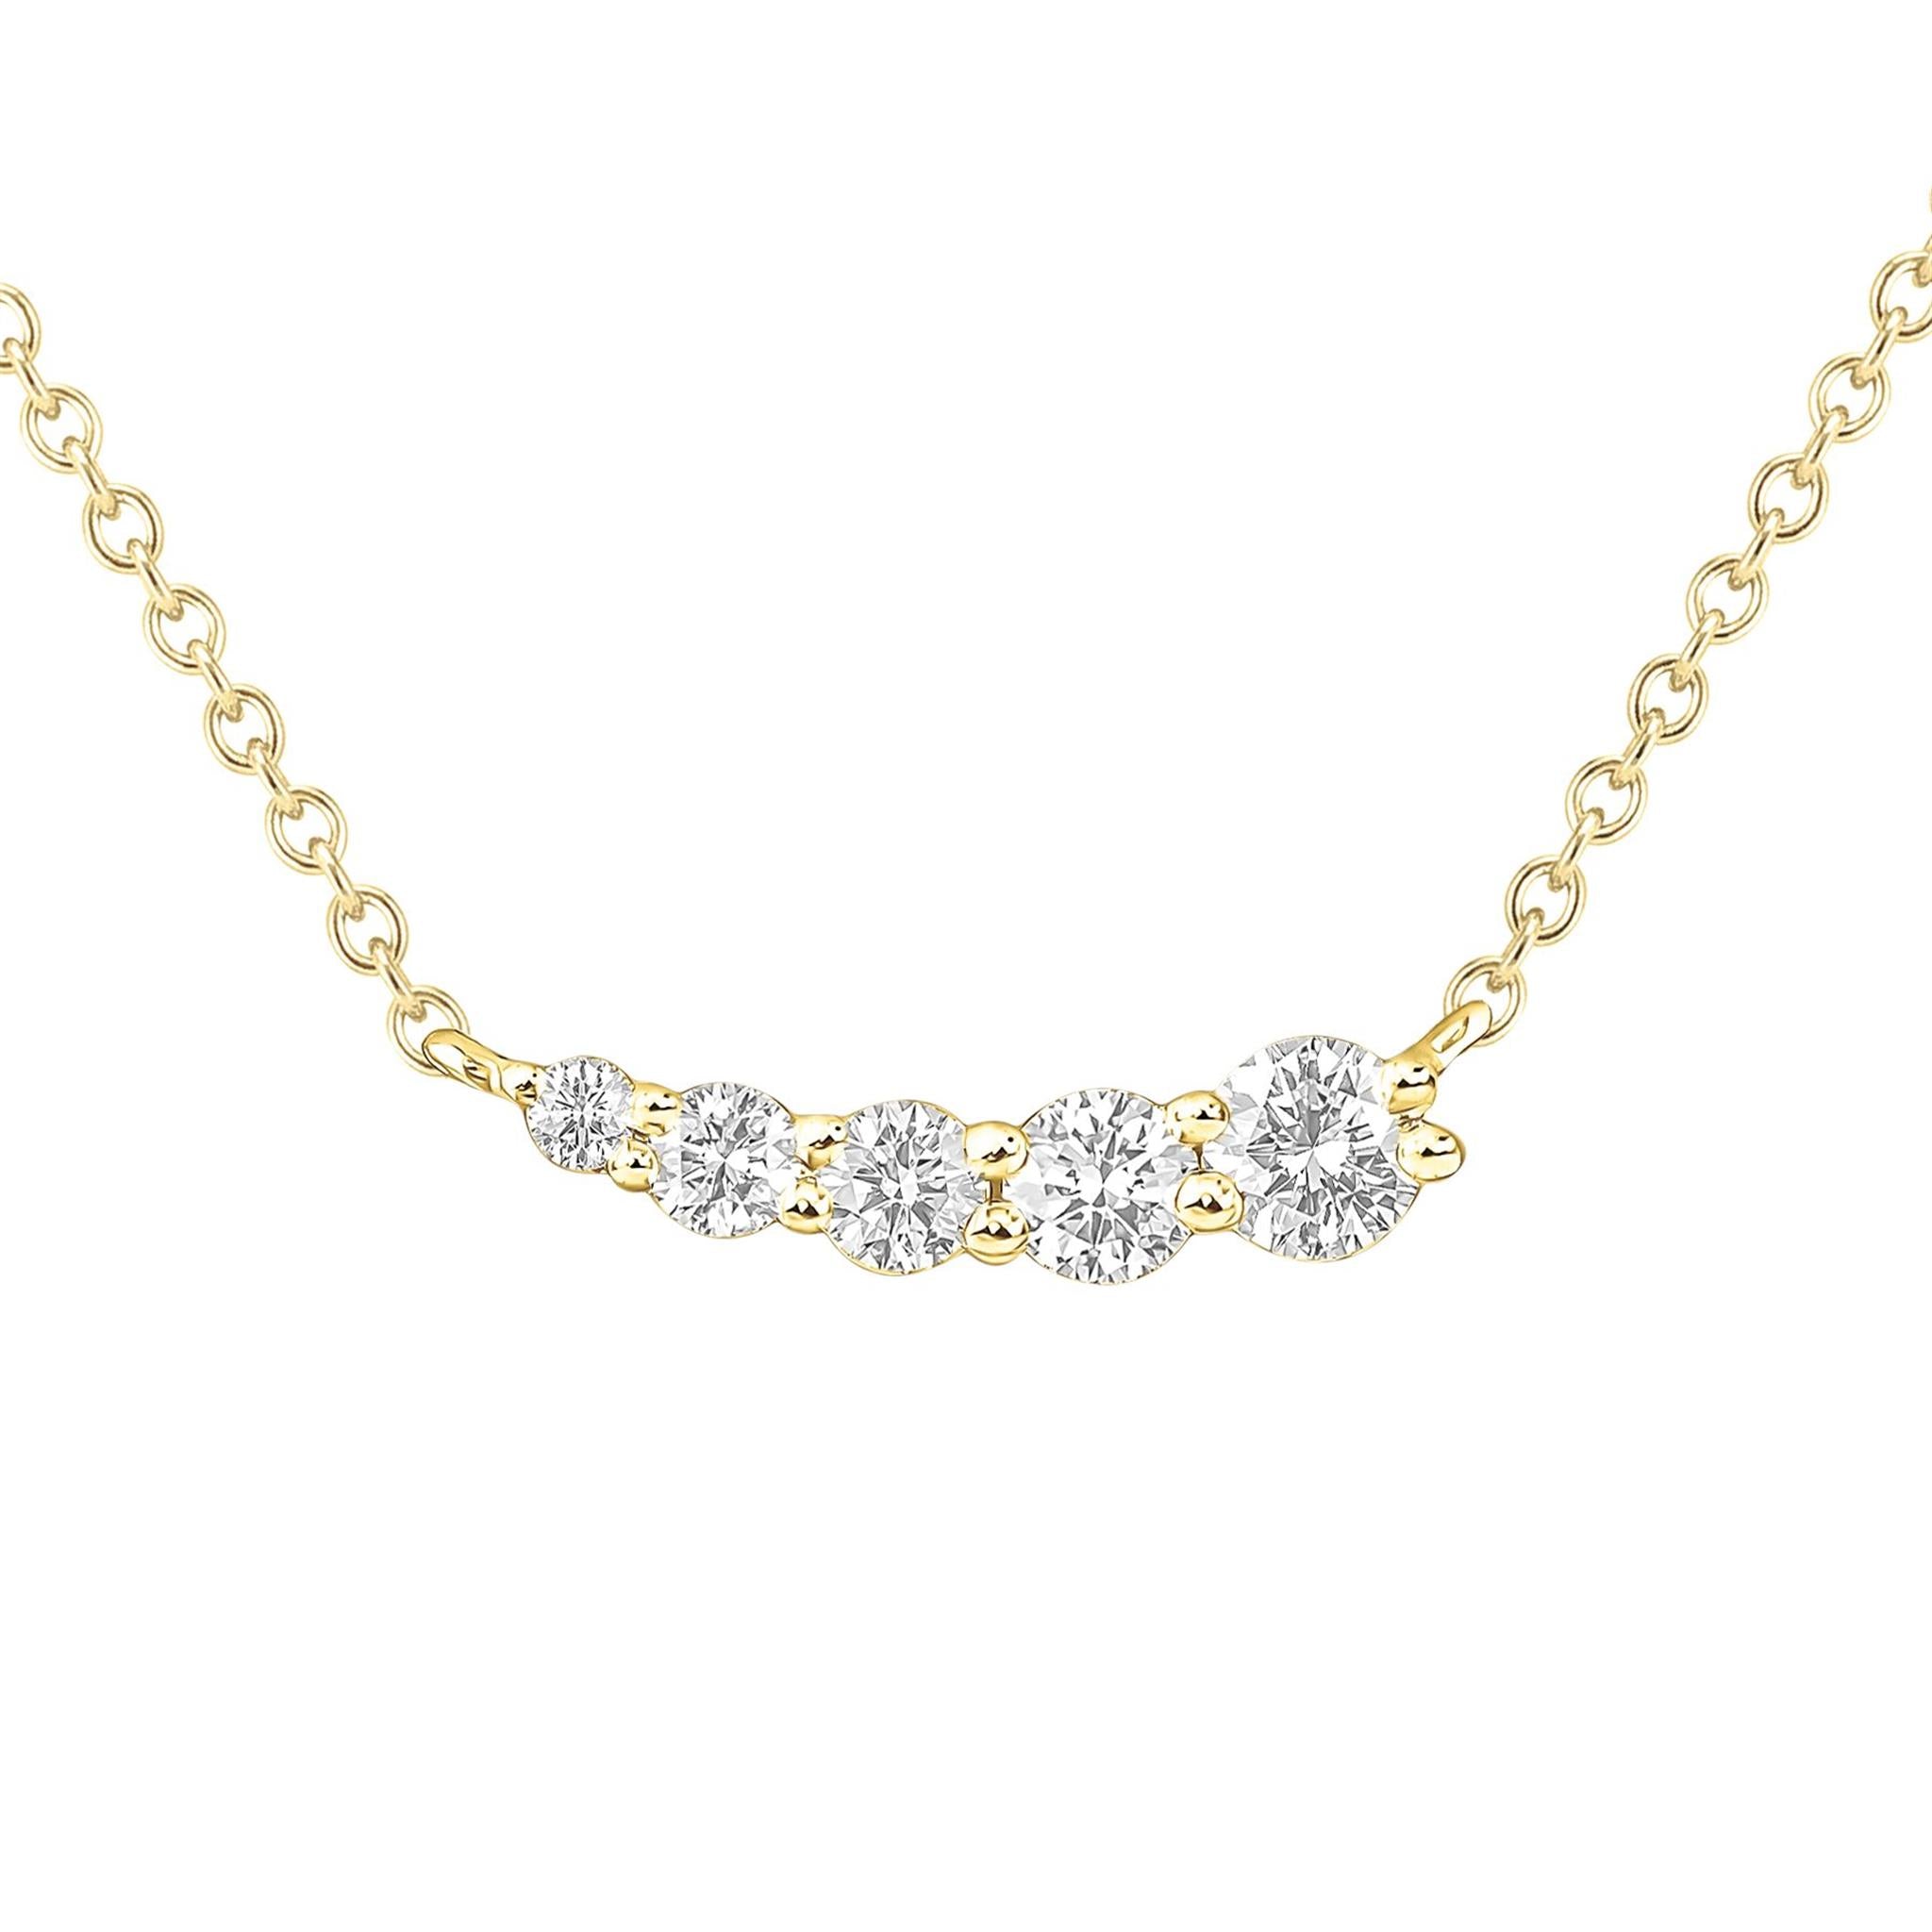 Buy 9ct Yellow Gold Diamond Necklace Online in India - Etsy